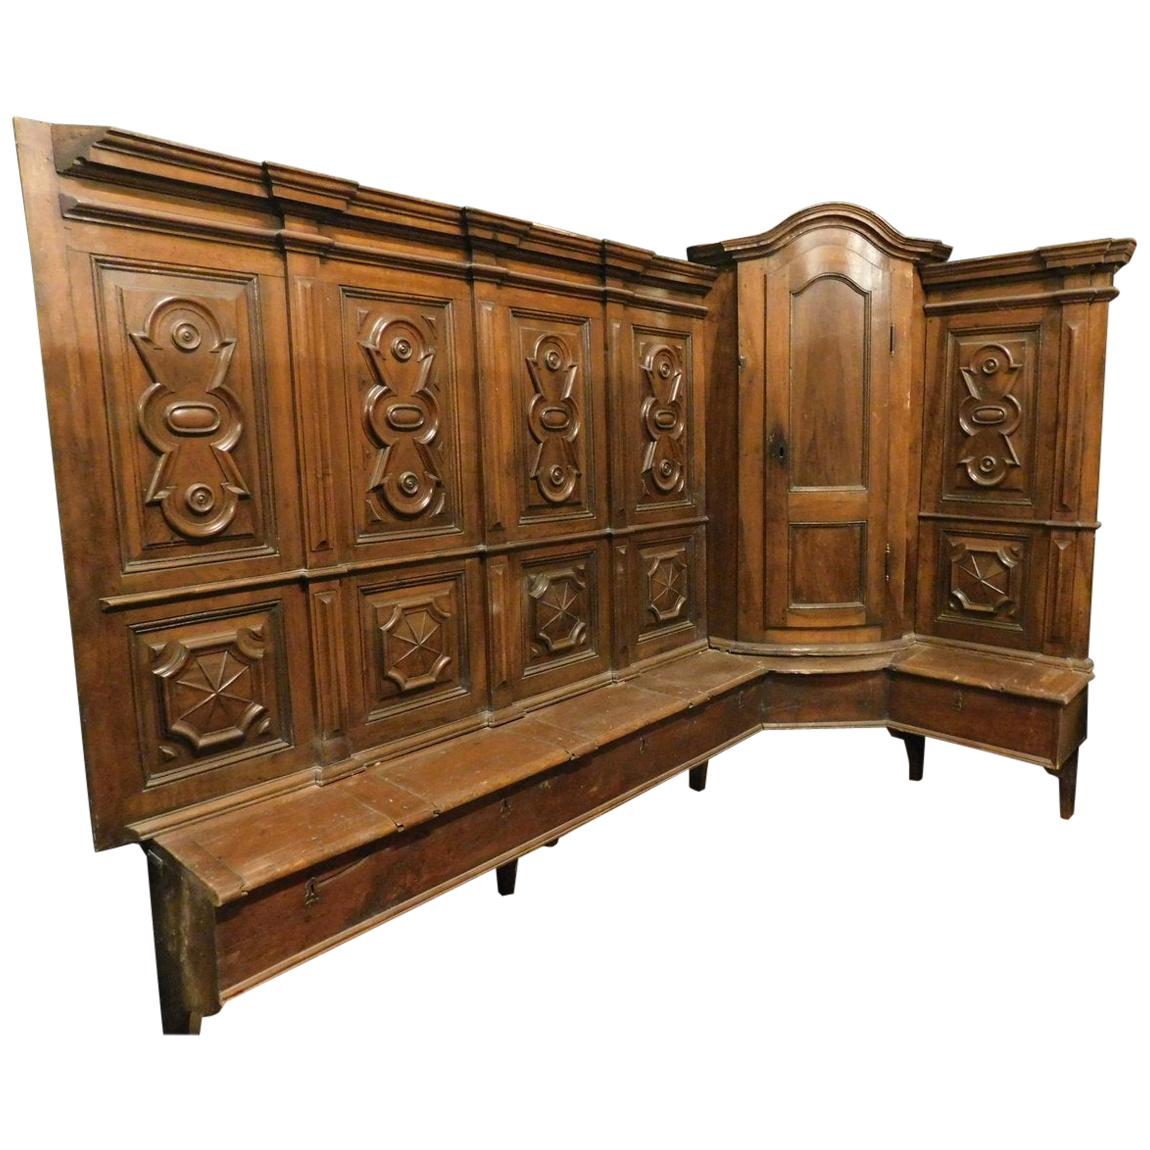 Antique walnut Sacristy choir, seats & corner cupboards, opening seats, '500 Italy For Sale